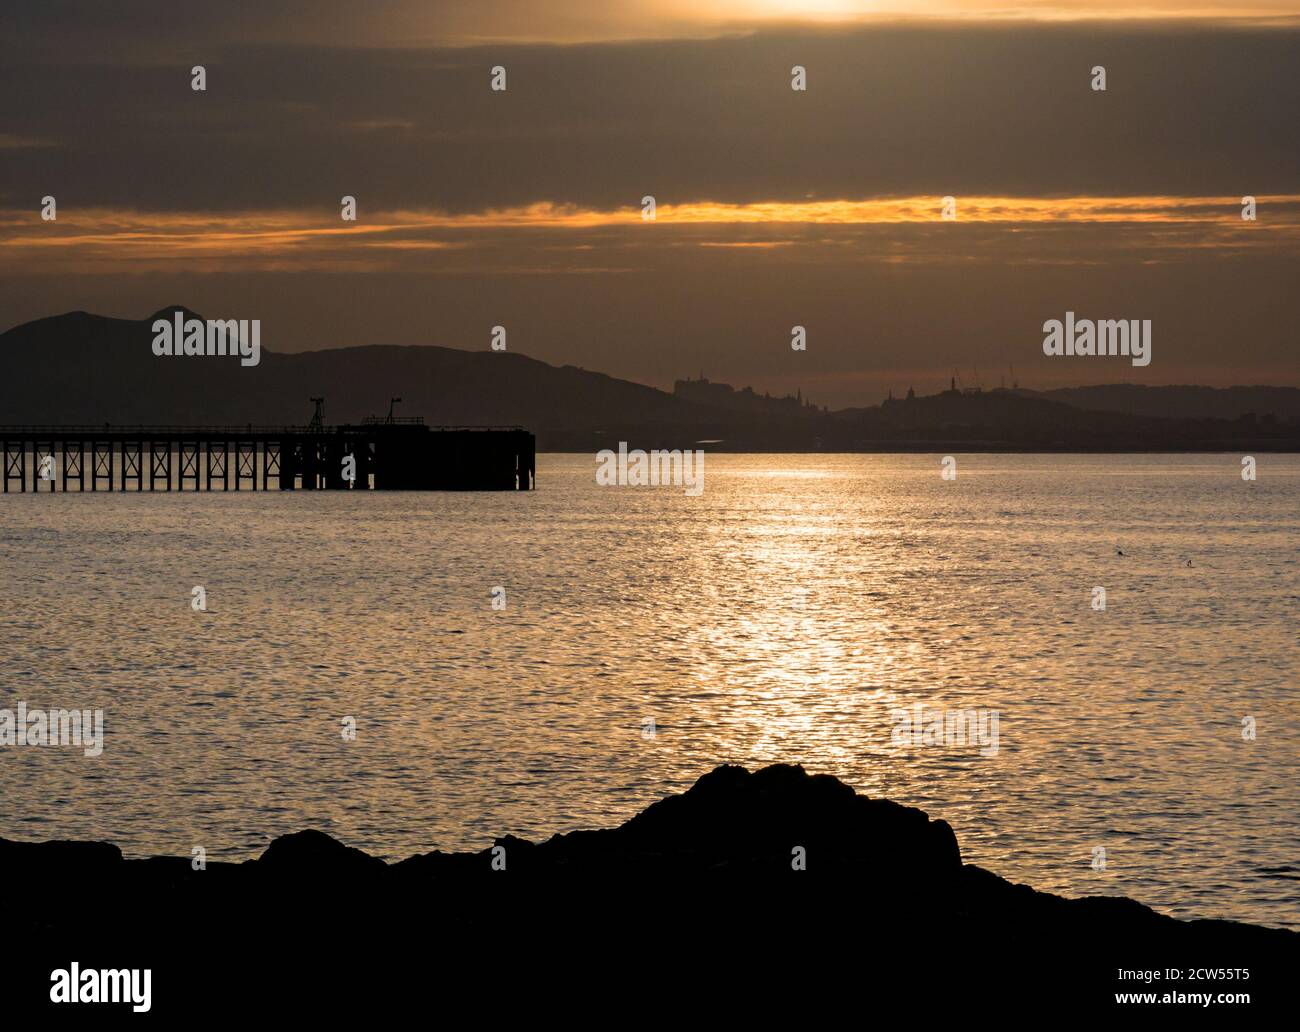 East Lothian, Scotland, United Kingdom, 27th September 2020. UK Weather: sunset over the Firth of Forth looking towards the distinctive Edinburgh skyline with a silhouette of Cockenzie disused pier Stock Photo